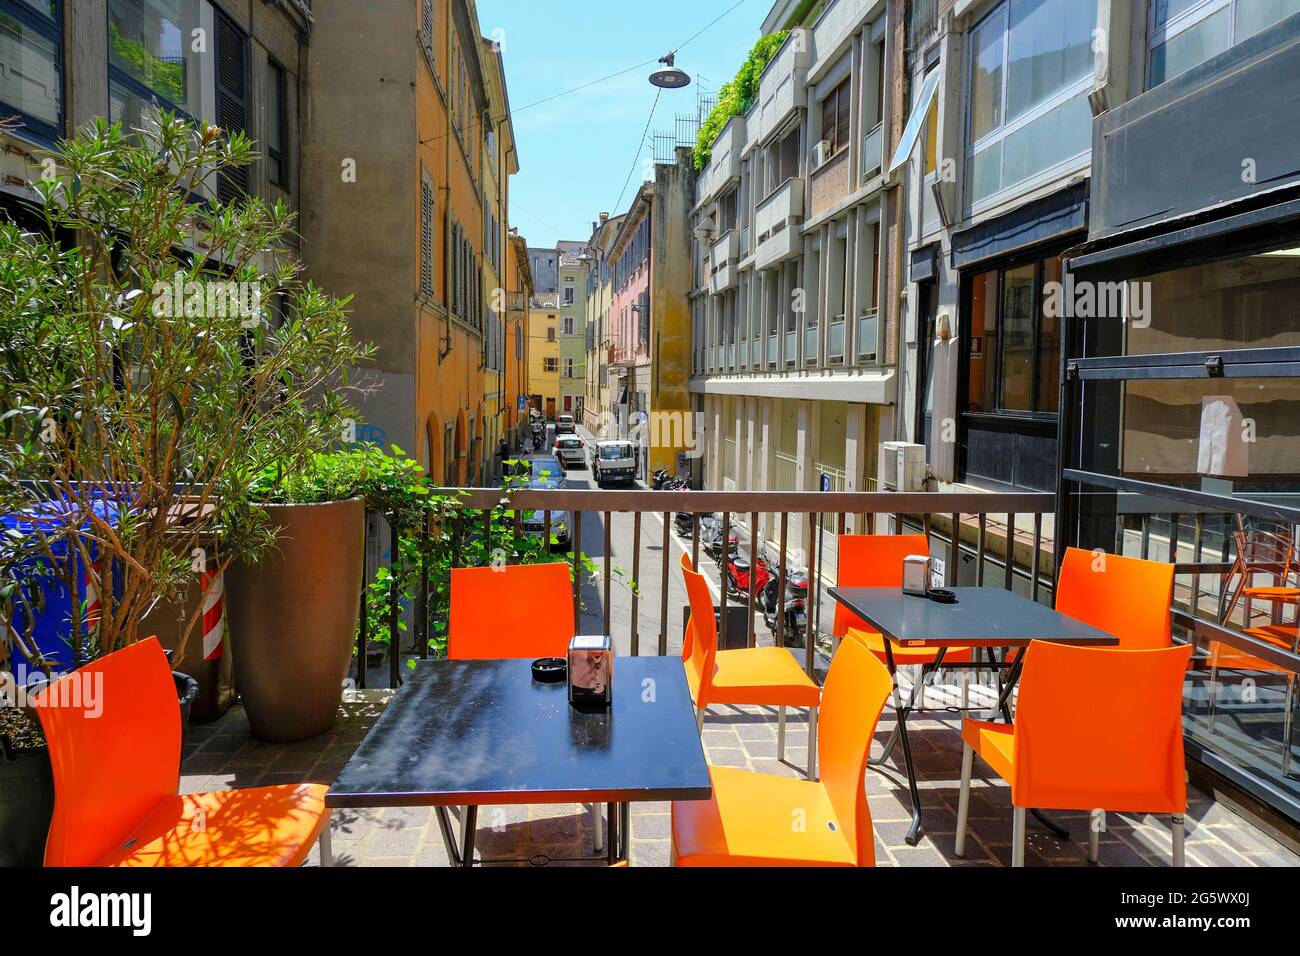 Black table with orange chairs across plants, colorful buildings in a restaurant terrace. Street cafe exterior. City life Stock Photo